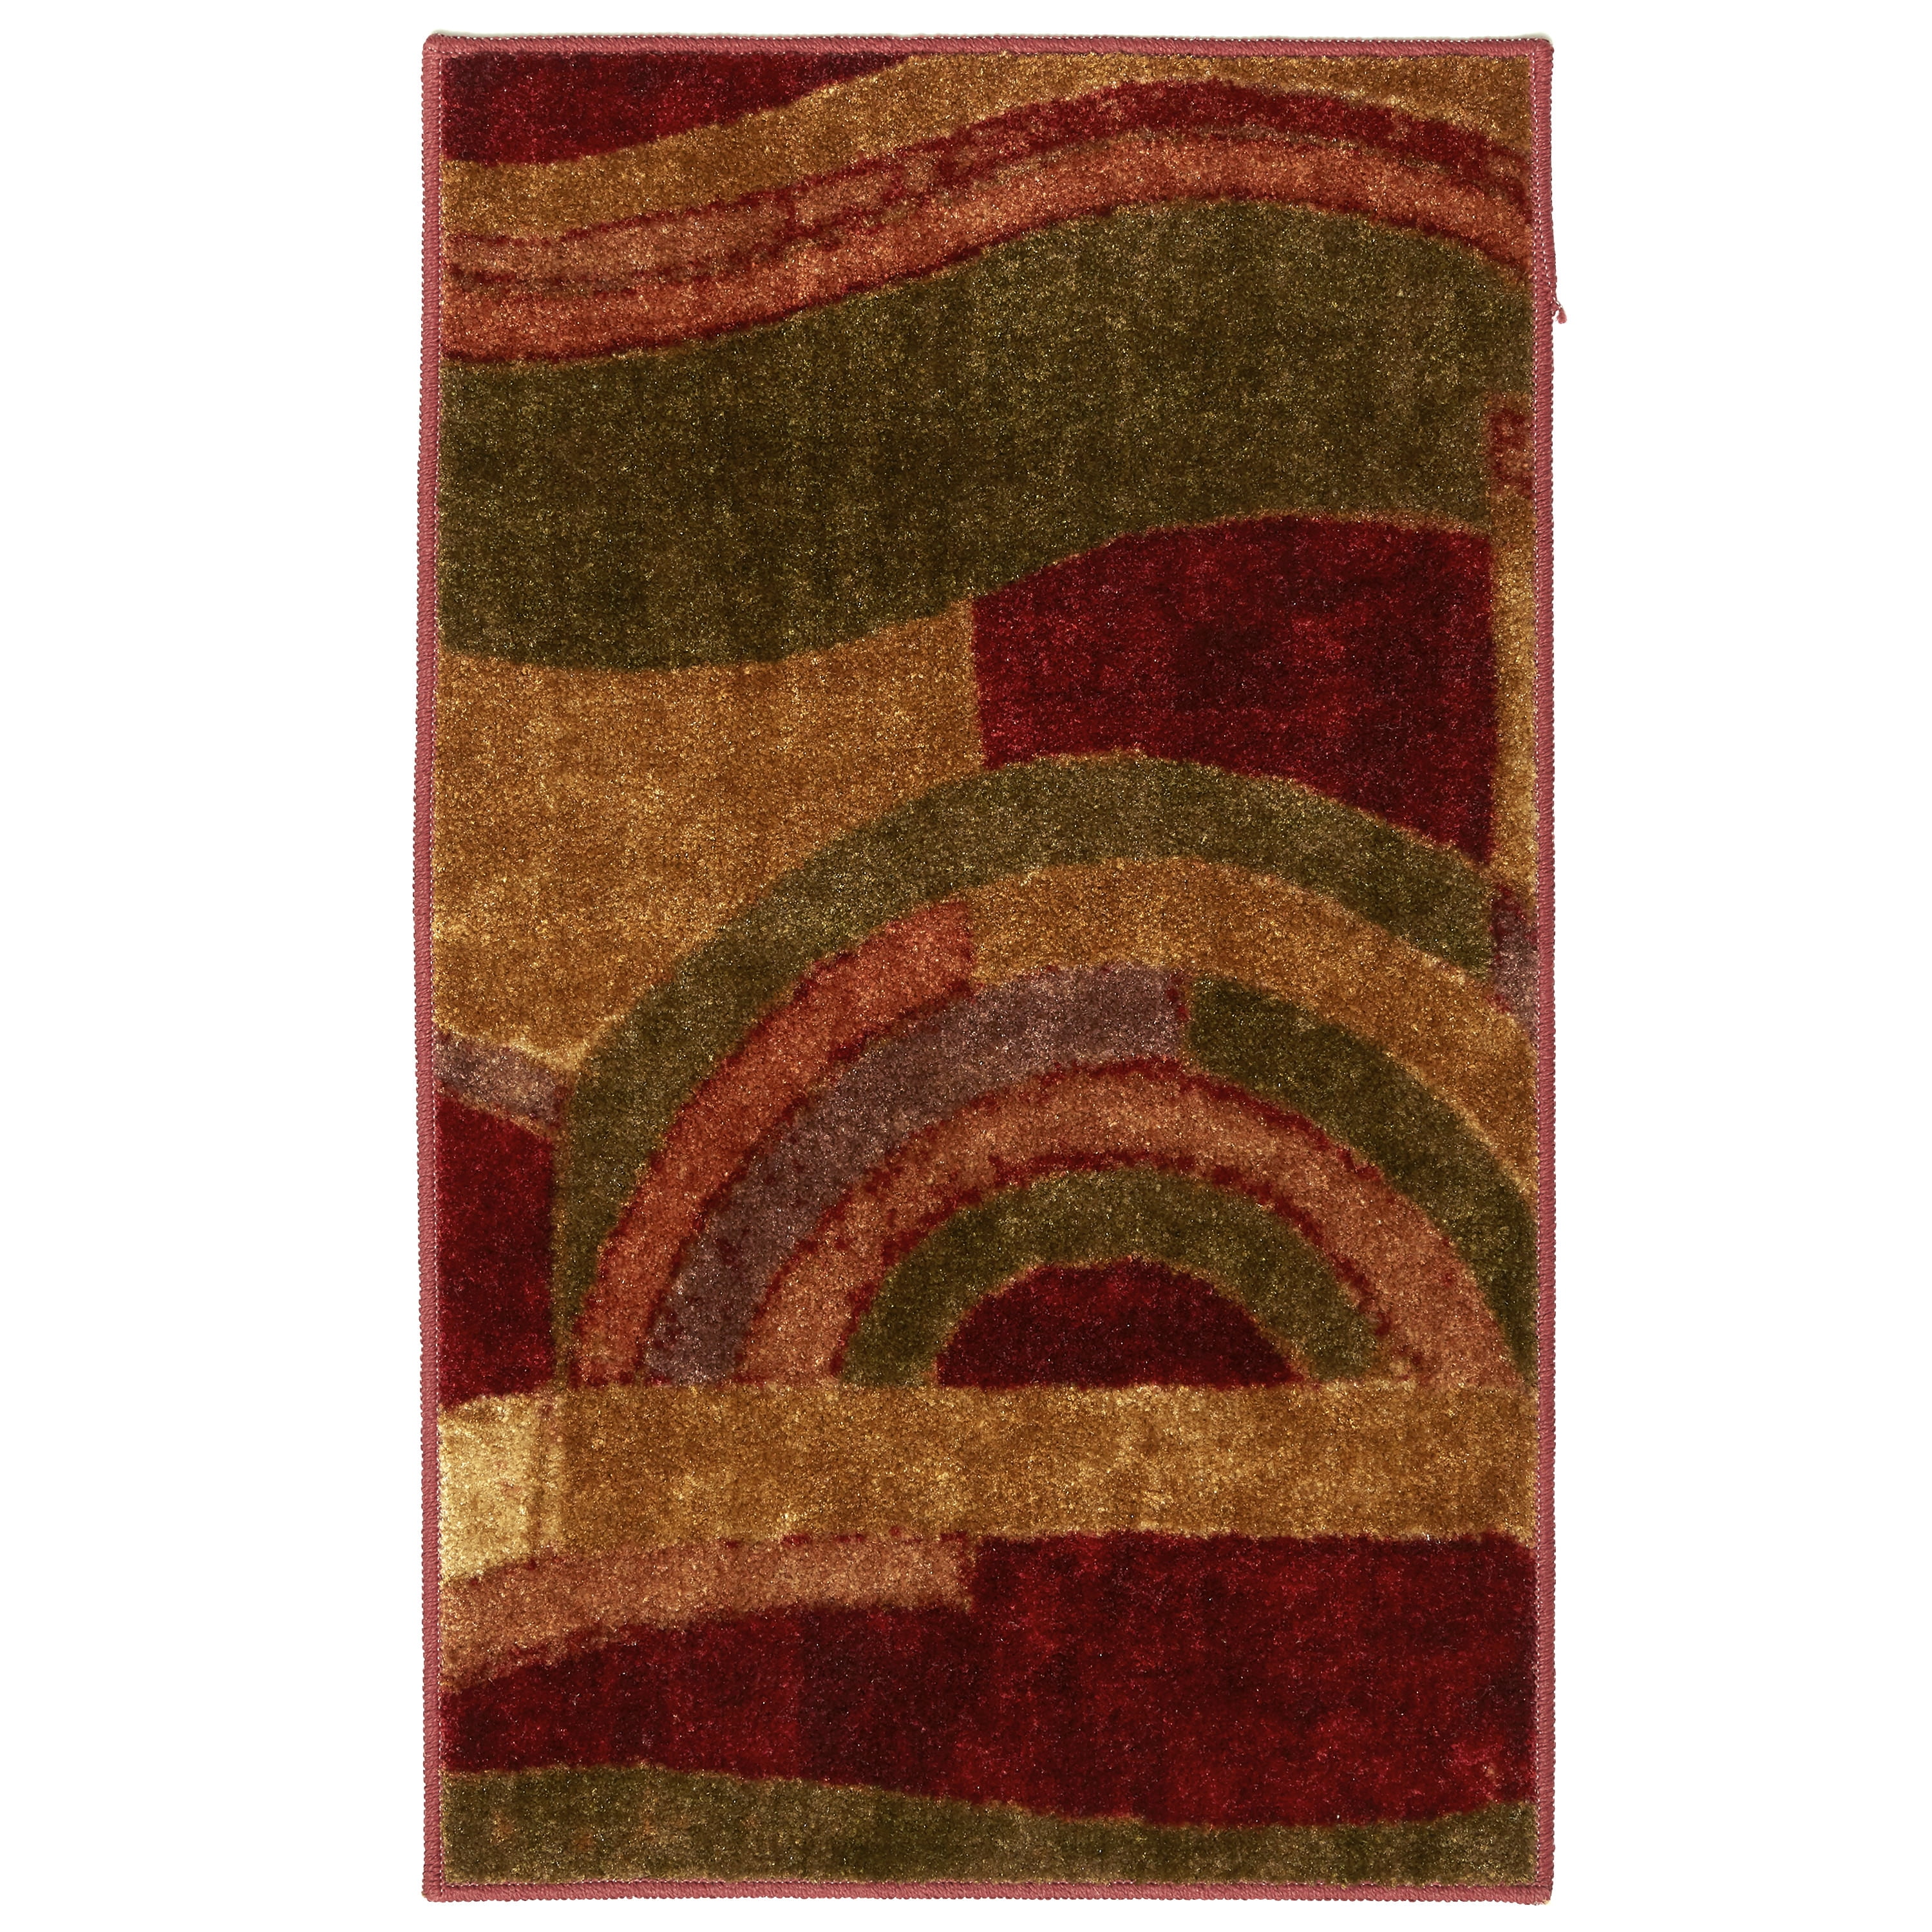 Mohawk Picasso 6' X 9' Large Area Rug 